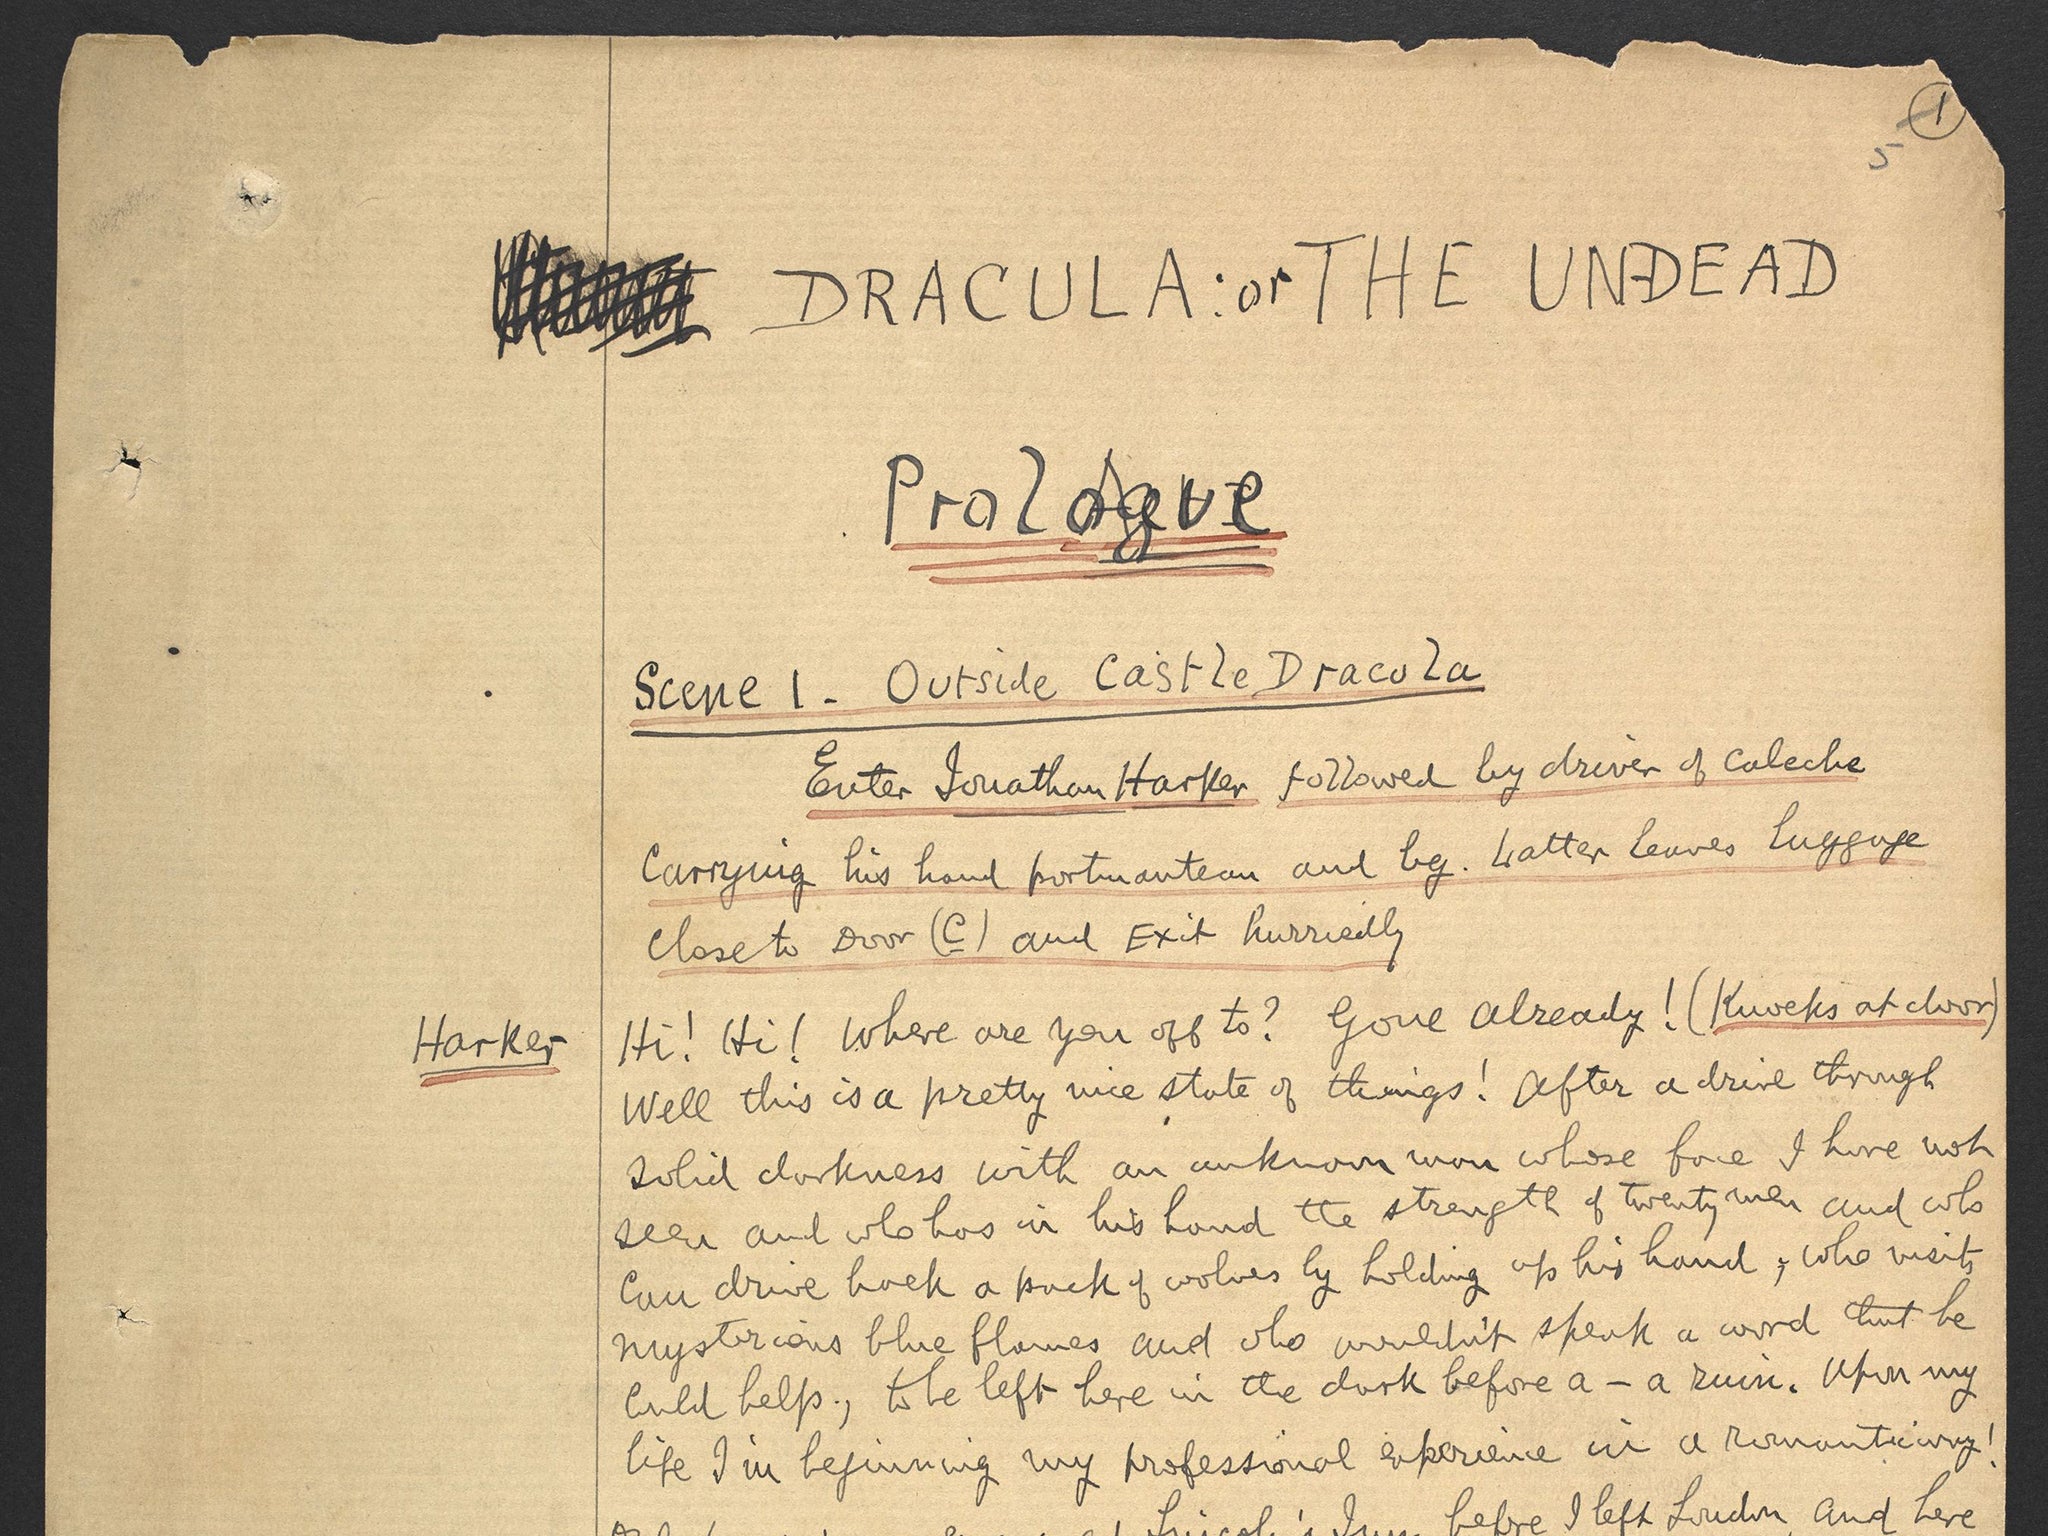 Bram Stoker's theatrical production of Dracula or 'The Un-dead'